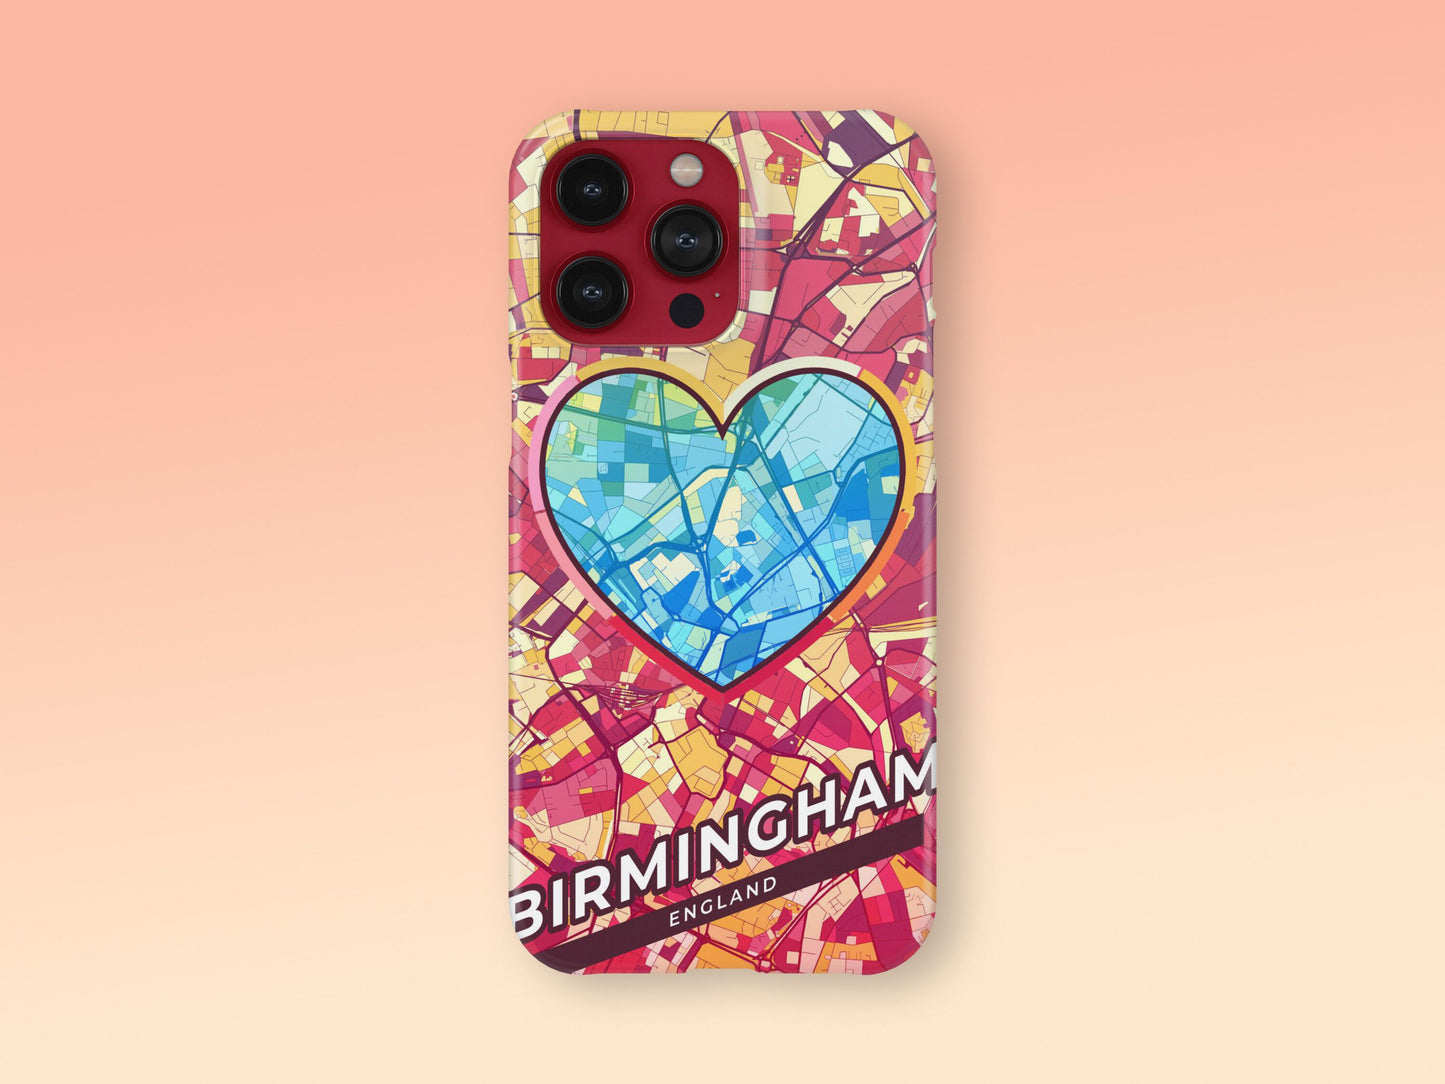 Birmingham England slim phone case with colorful icon. Birthday, wedding or housewarming gift. Couple match cases. 2